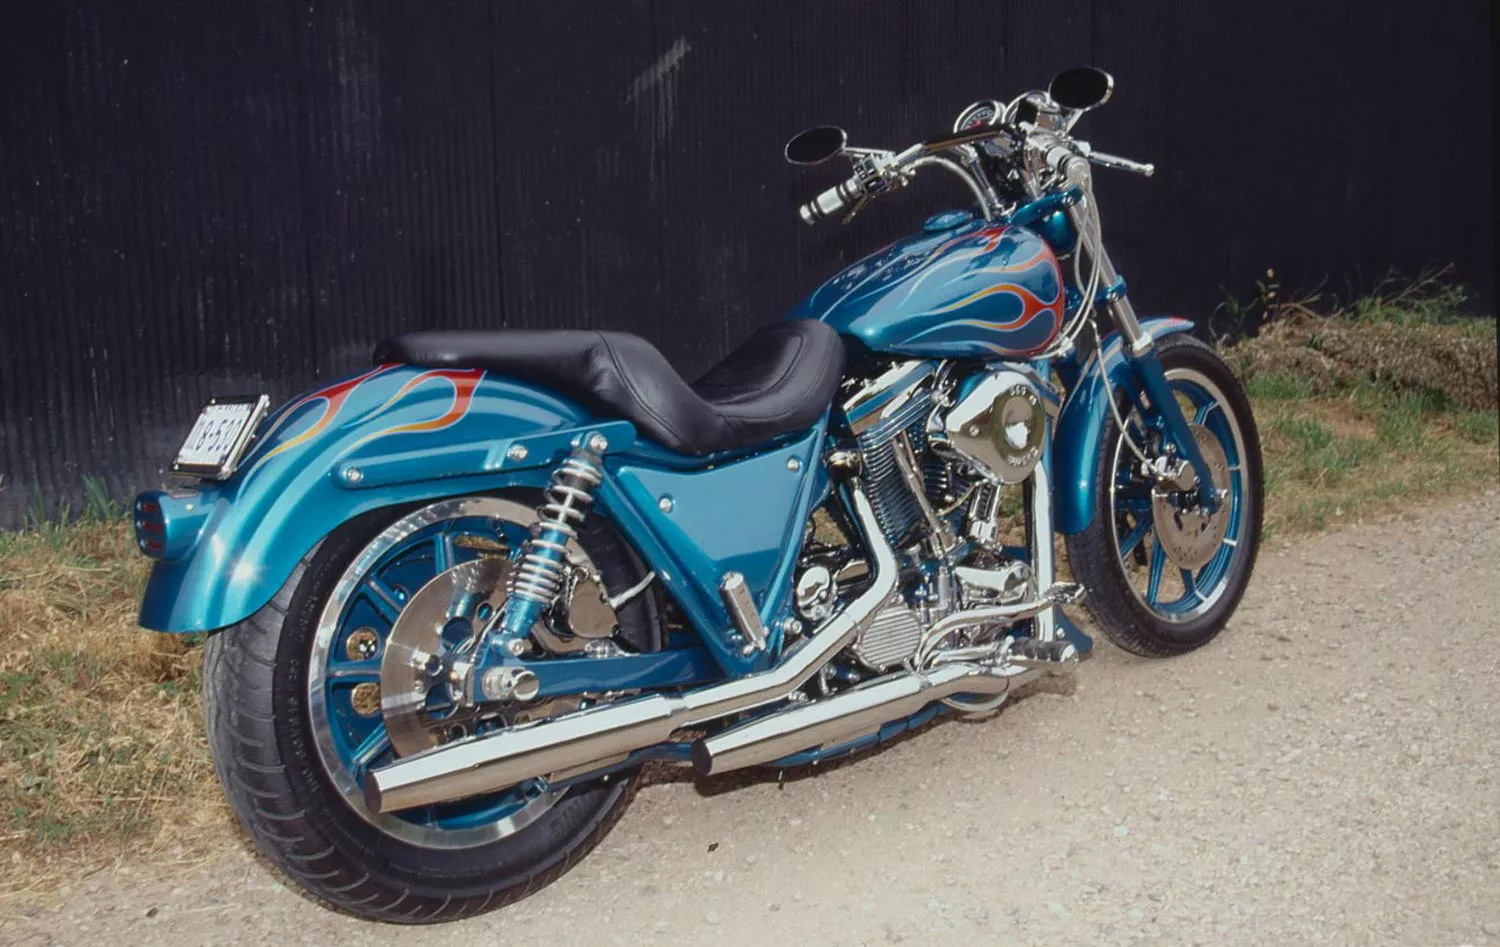 Teal pearl overlaid with persimmon-to-goldenrod flames dress up this 1987 Harley-Davidson FXR SP.